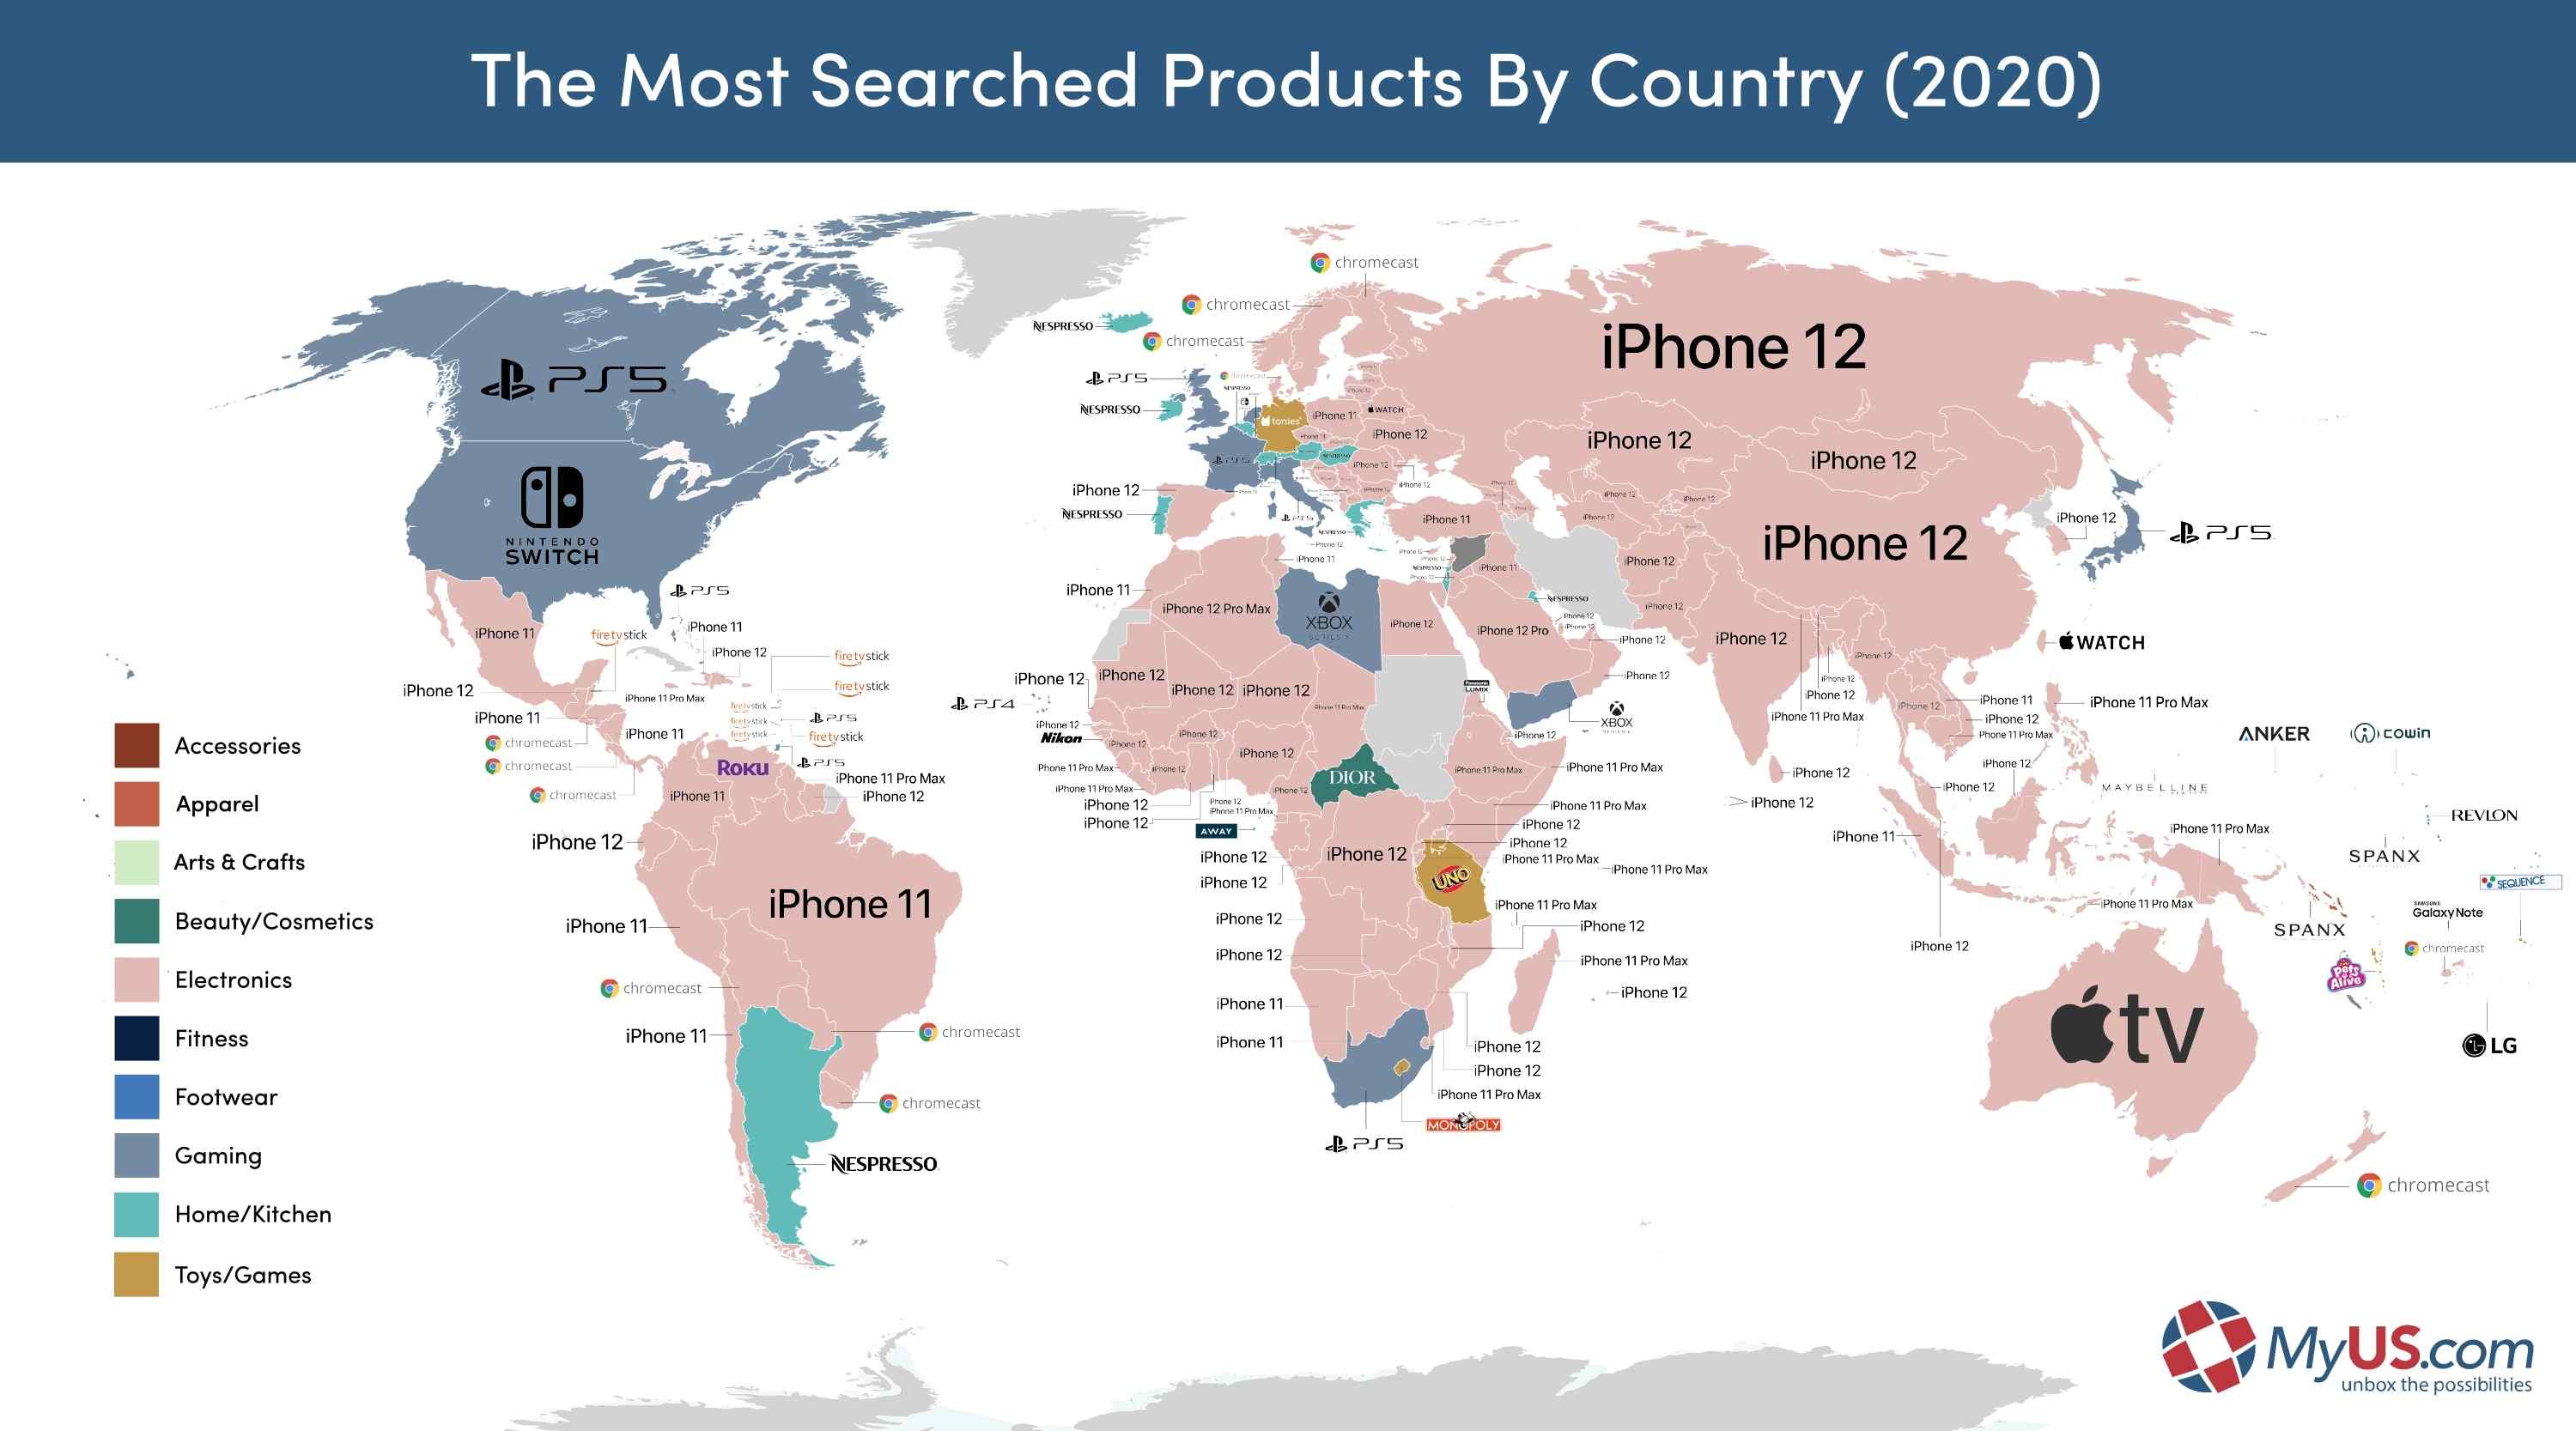 Graphic showing world map with names of products that were most searched in 2020 by each country